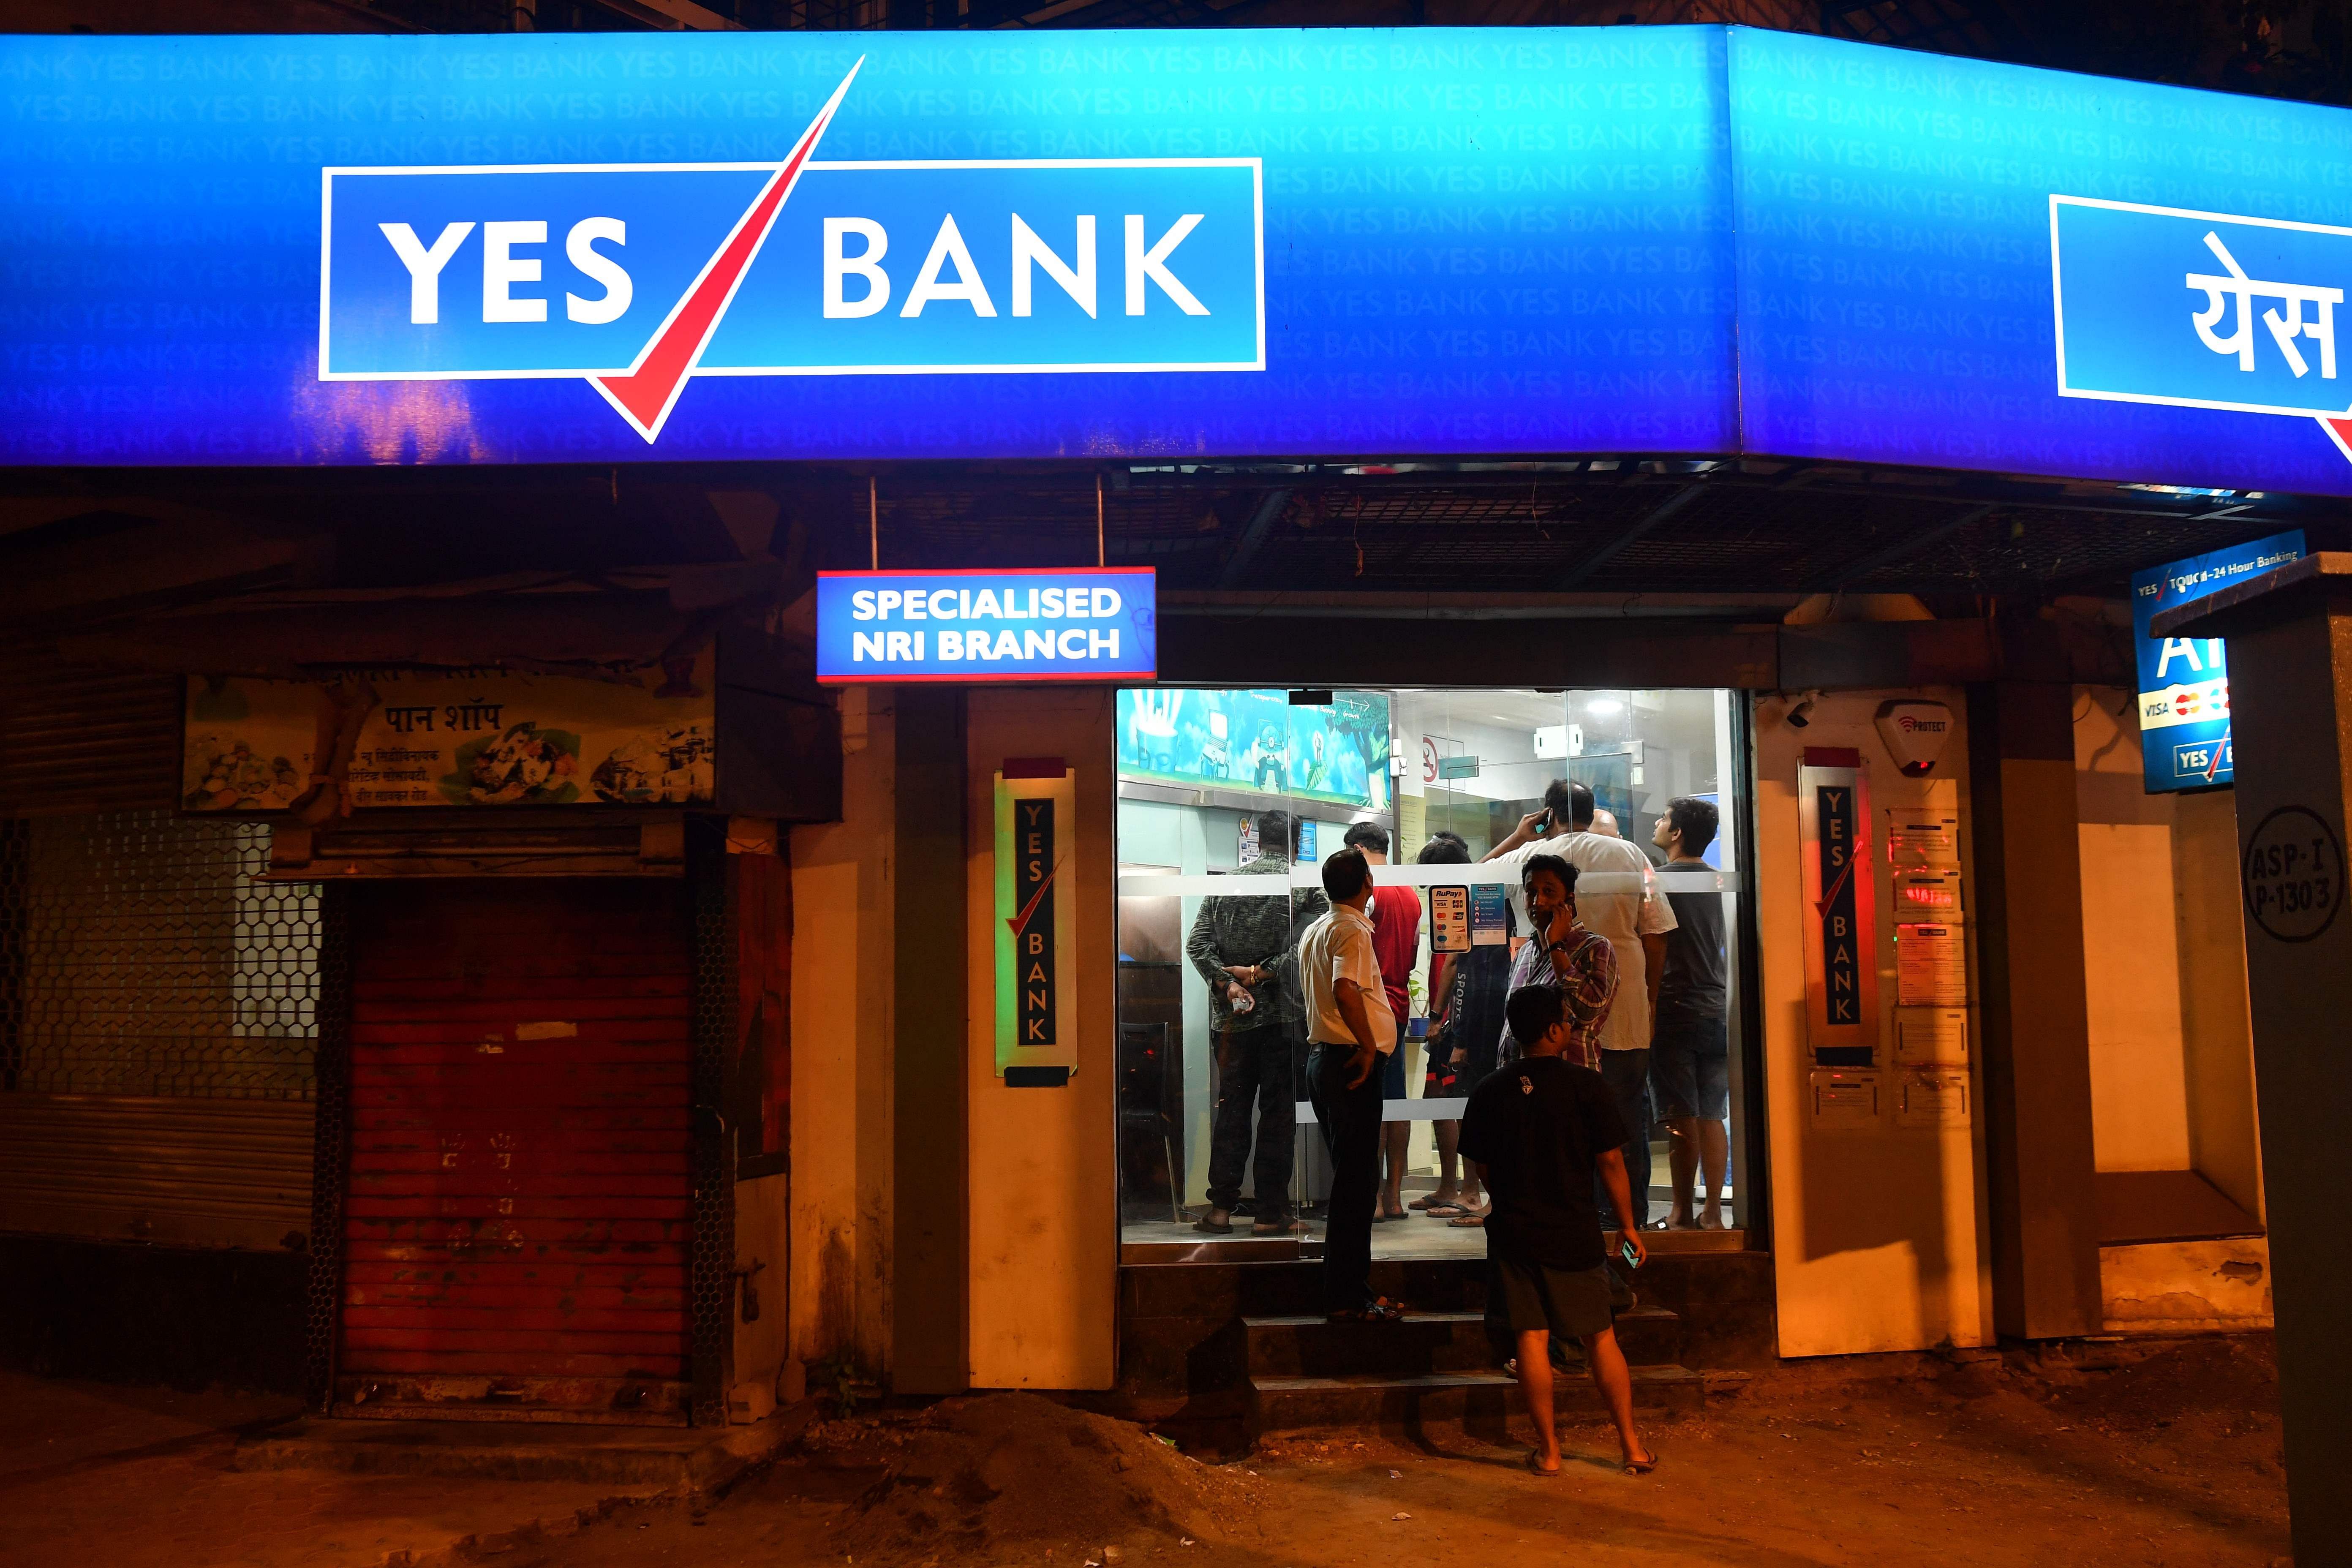 Customers of Yes Bank queue up to withdraw money from their accounts at an Automated Teller Machine (ATM) kiosk in Mumbai. (AFP Photo)